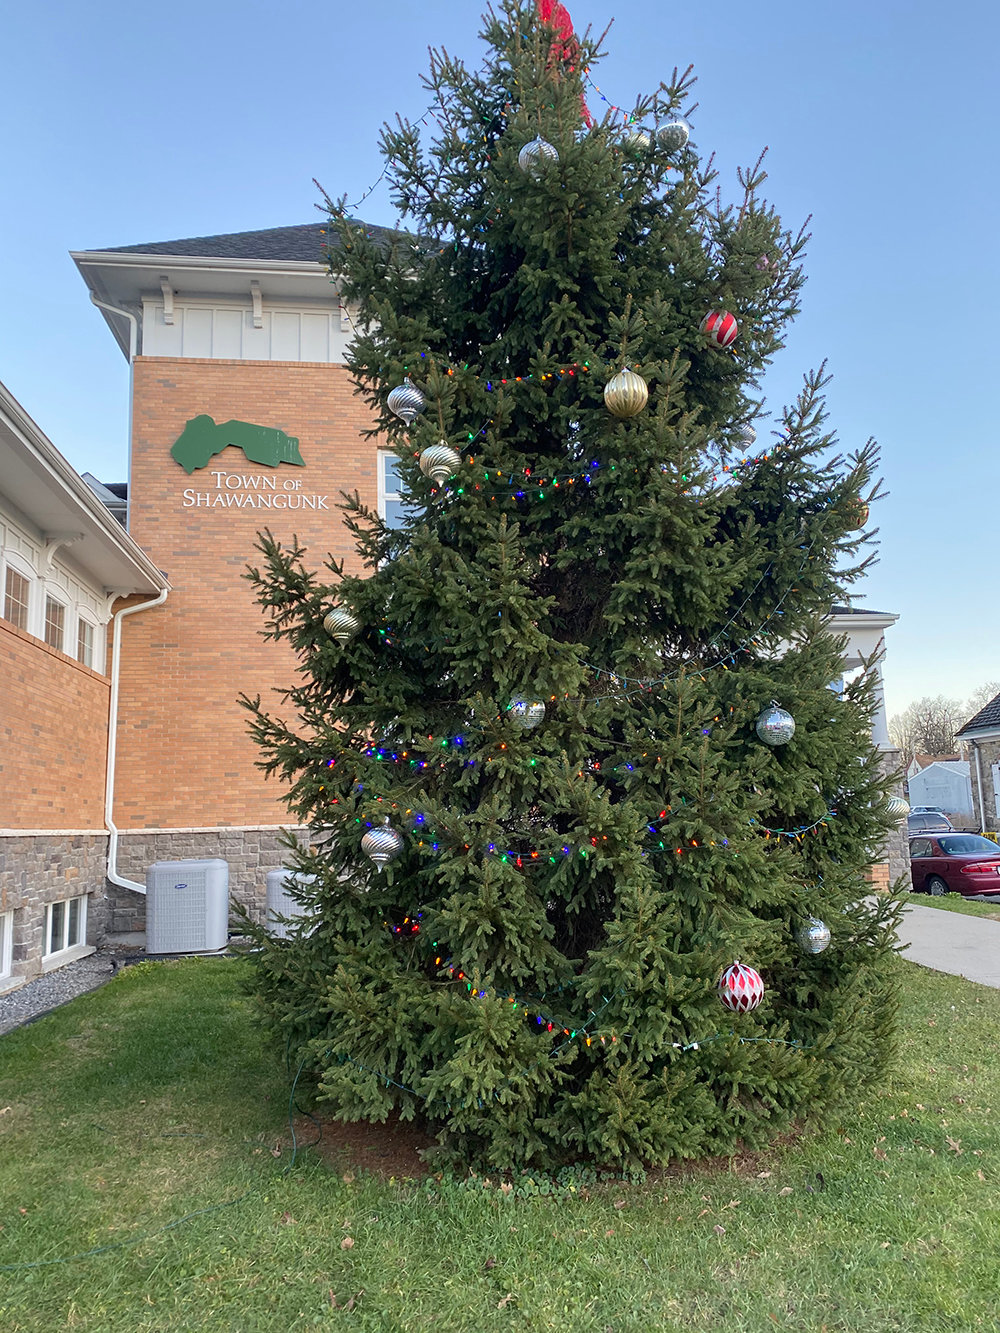 The Christmas Tree lit up and decorated in front of Shawangunk Town Hall.